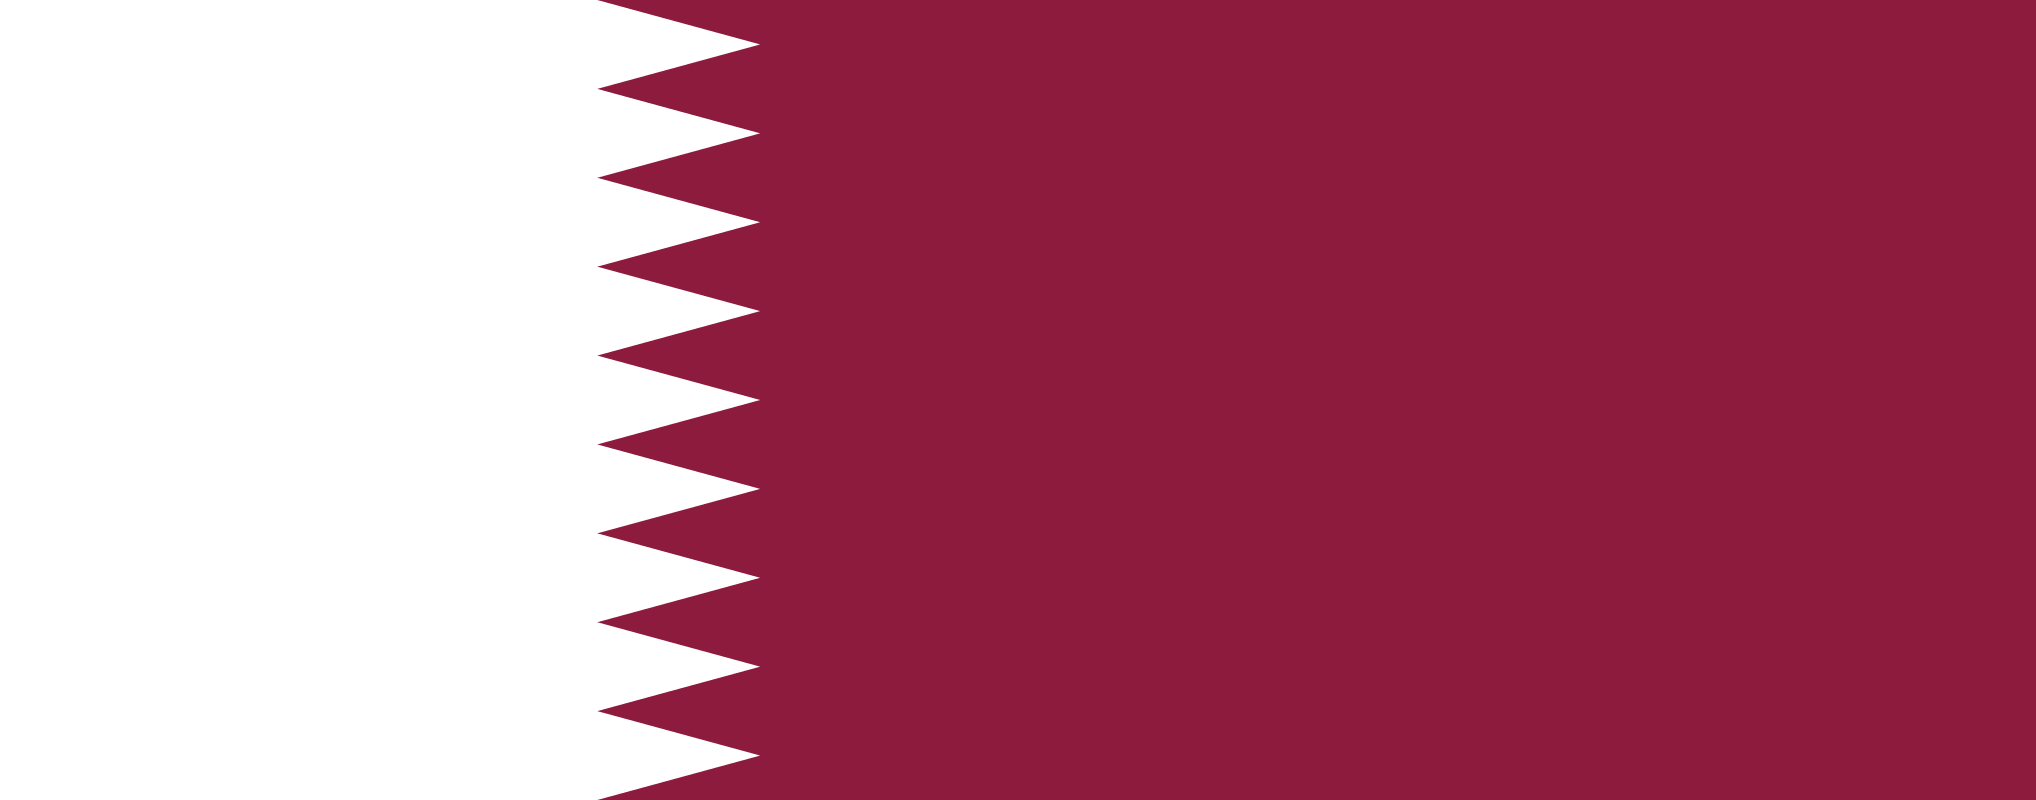 File:Flag of Qatar.png - Wikimedia Commons